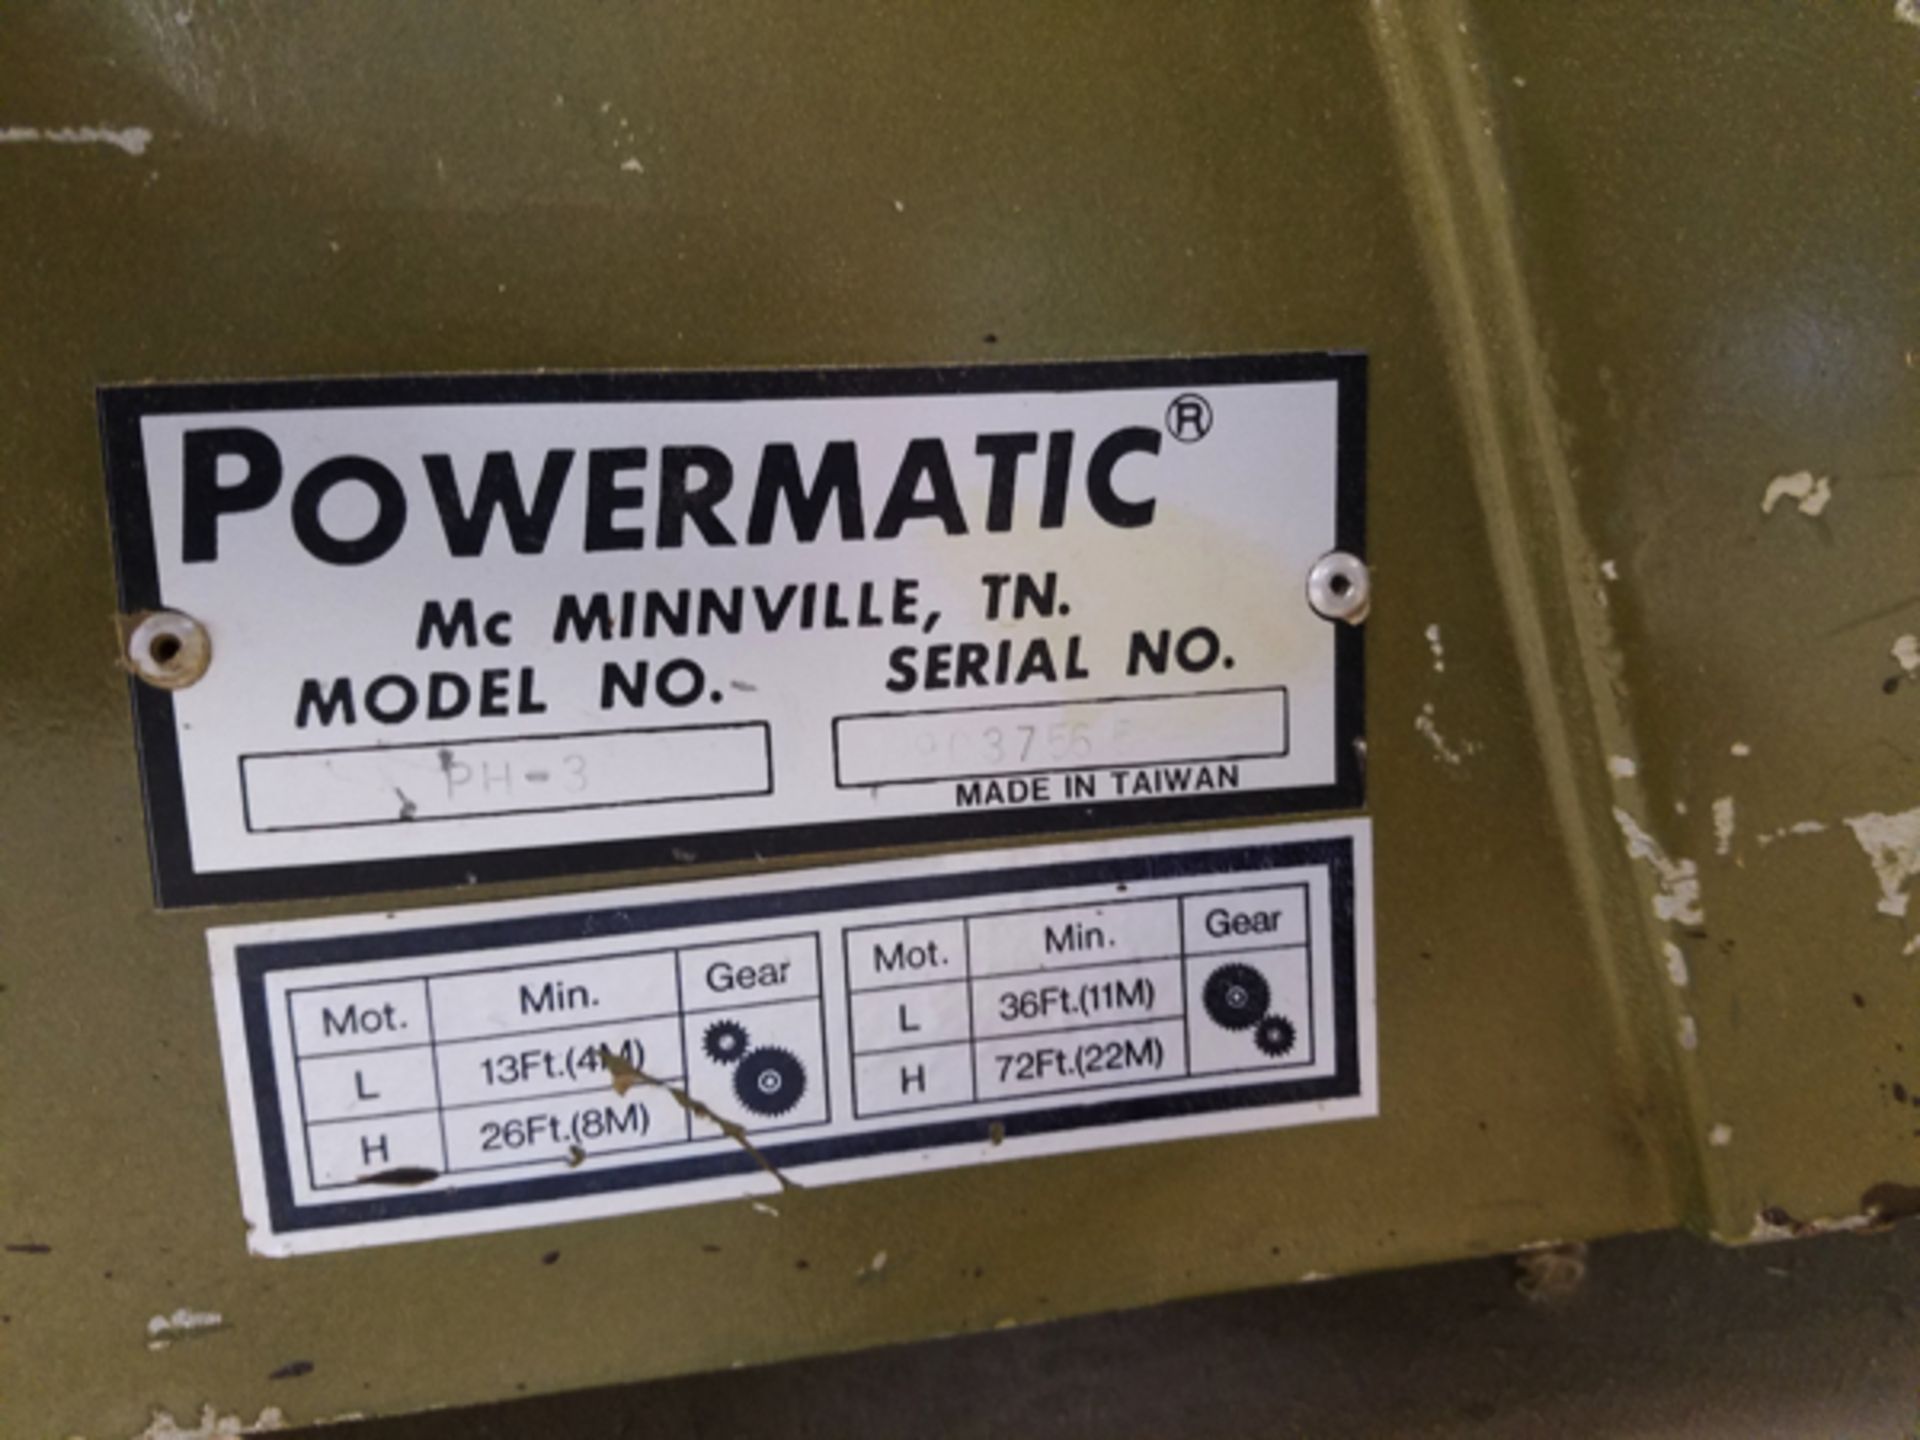 Lot of (2) Powermatic Table Saw Power Feeds, M# PH-3 | Rigging Price: $25 - Image 3 of 3